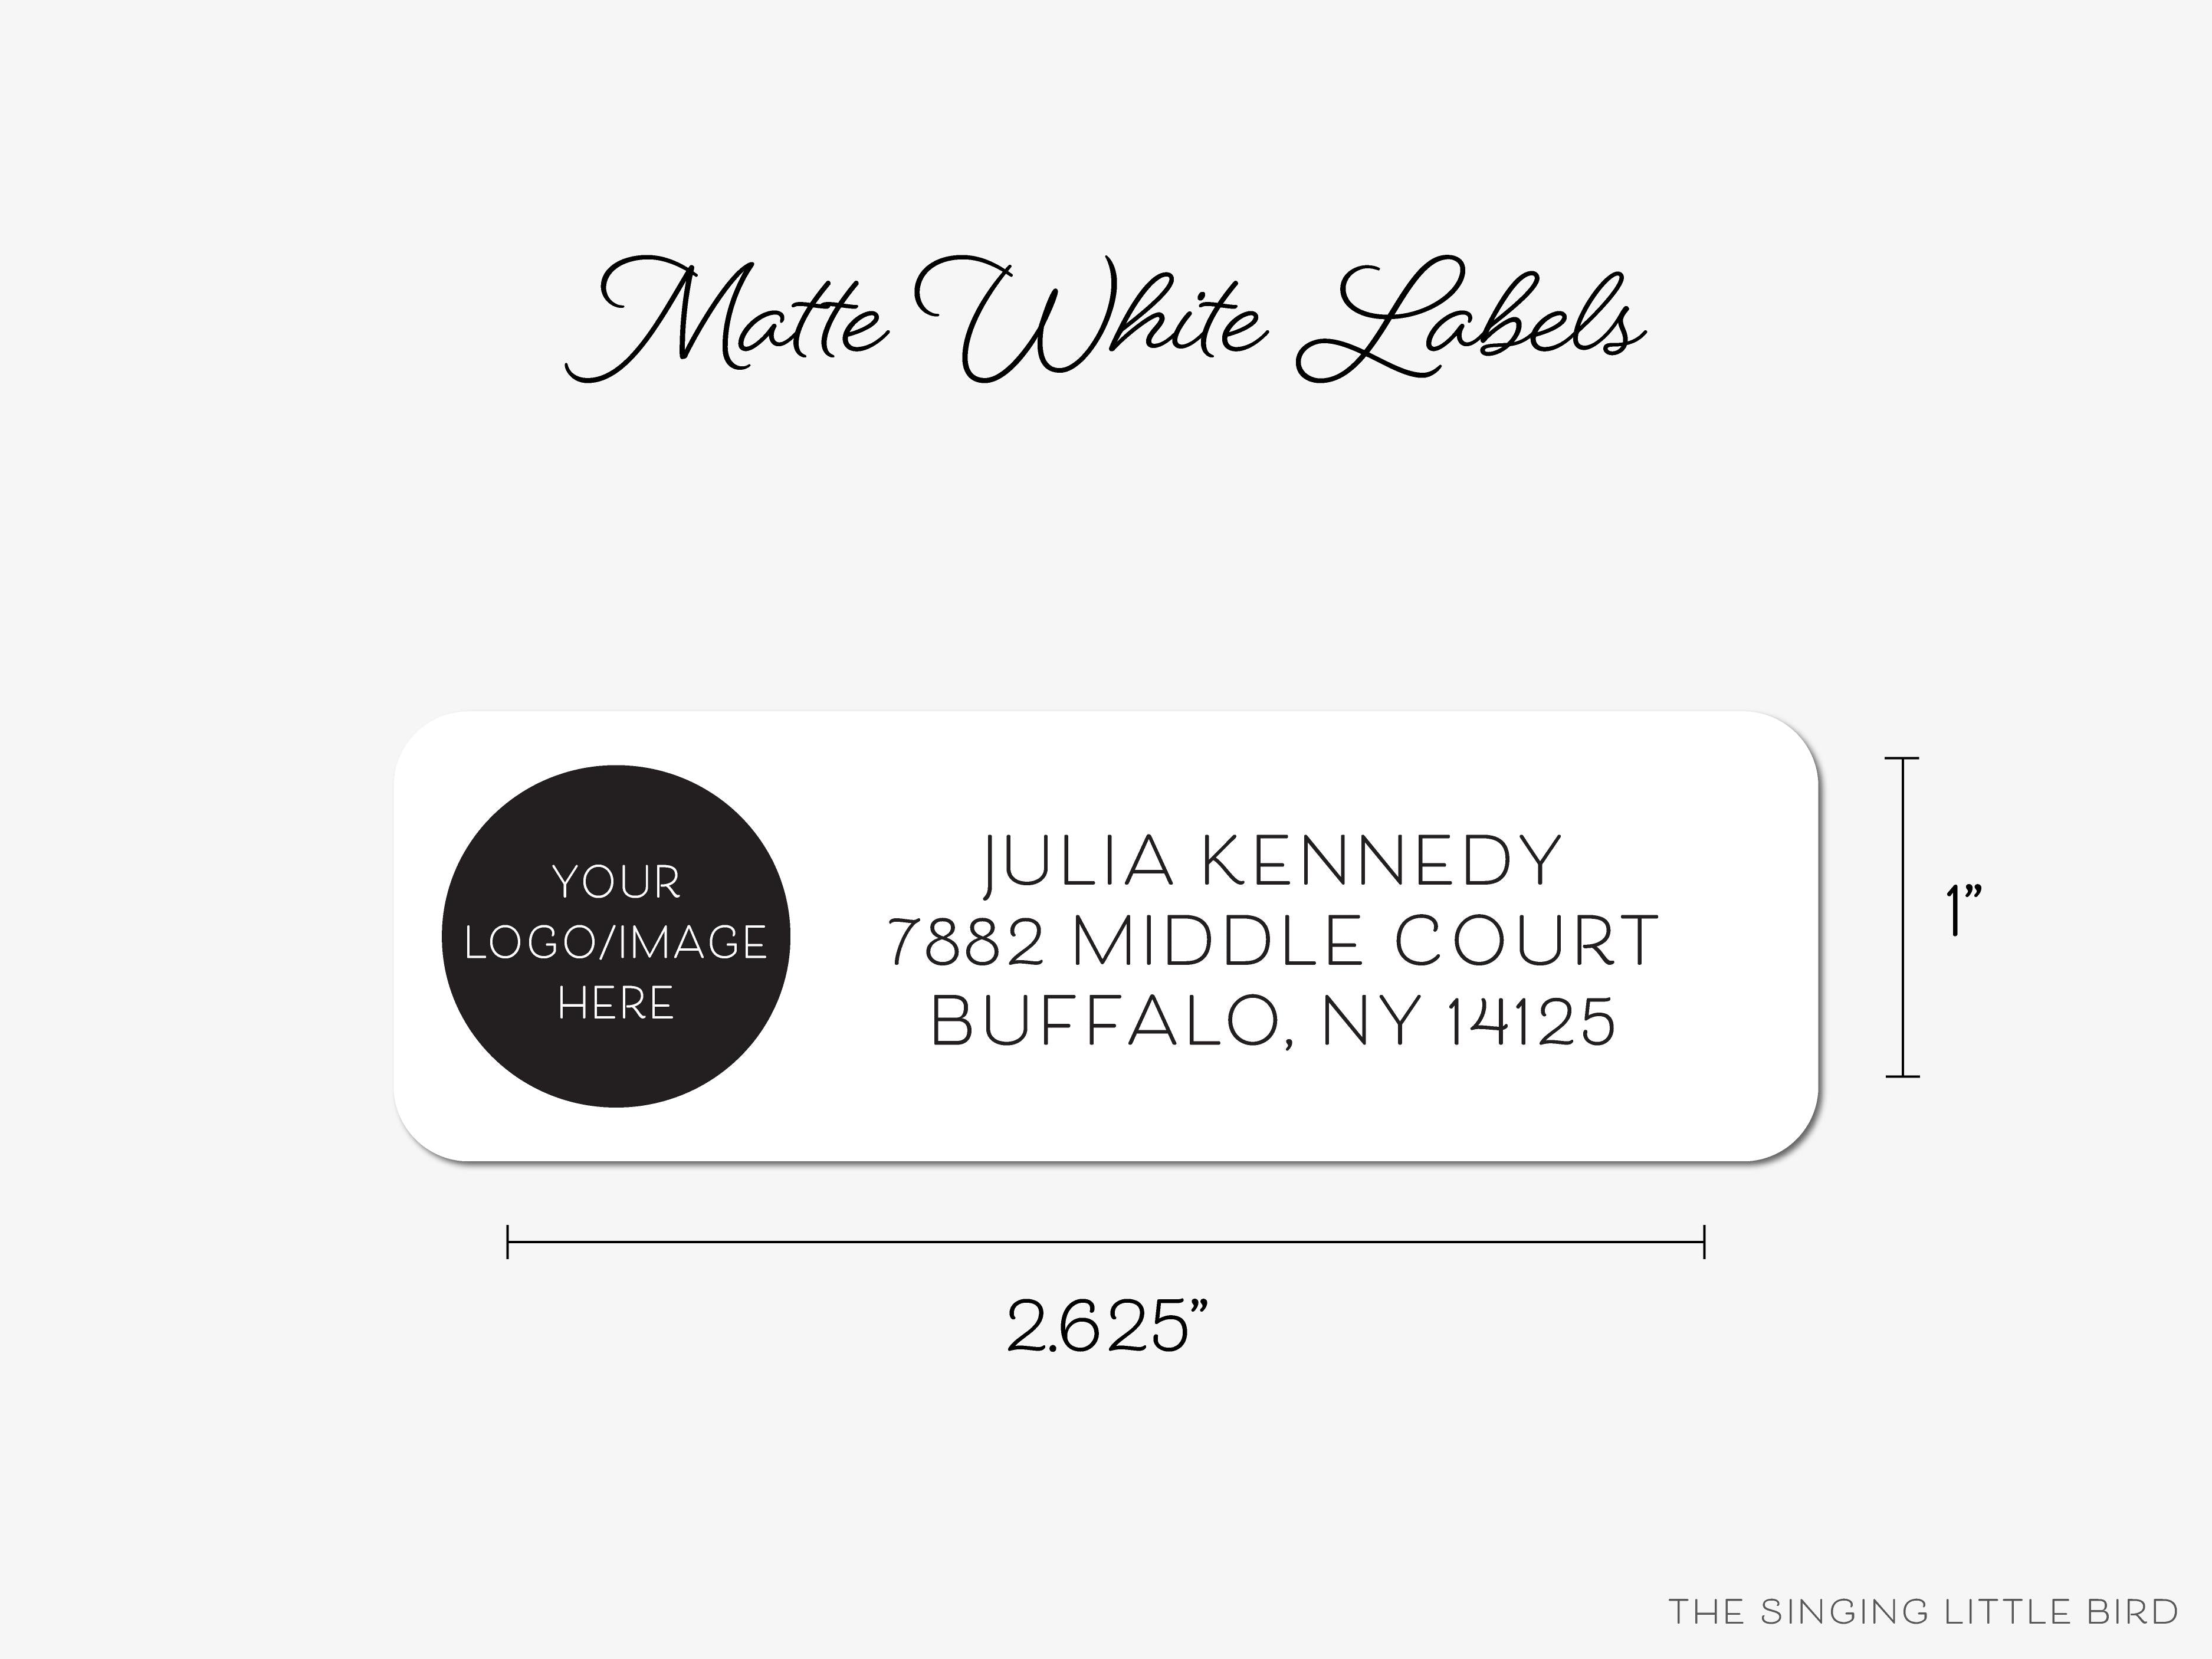 Custom Design Return Address Labels-These personalized return address labels are 2.625" x 1" and feature your custom design or logo, printed in the USA on beautiful matte finish labels. These make great gifts for yourself or your business.-The Singing Little Bird